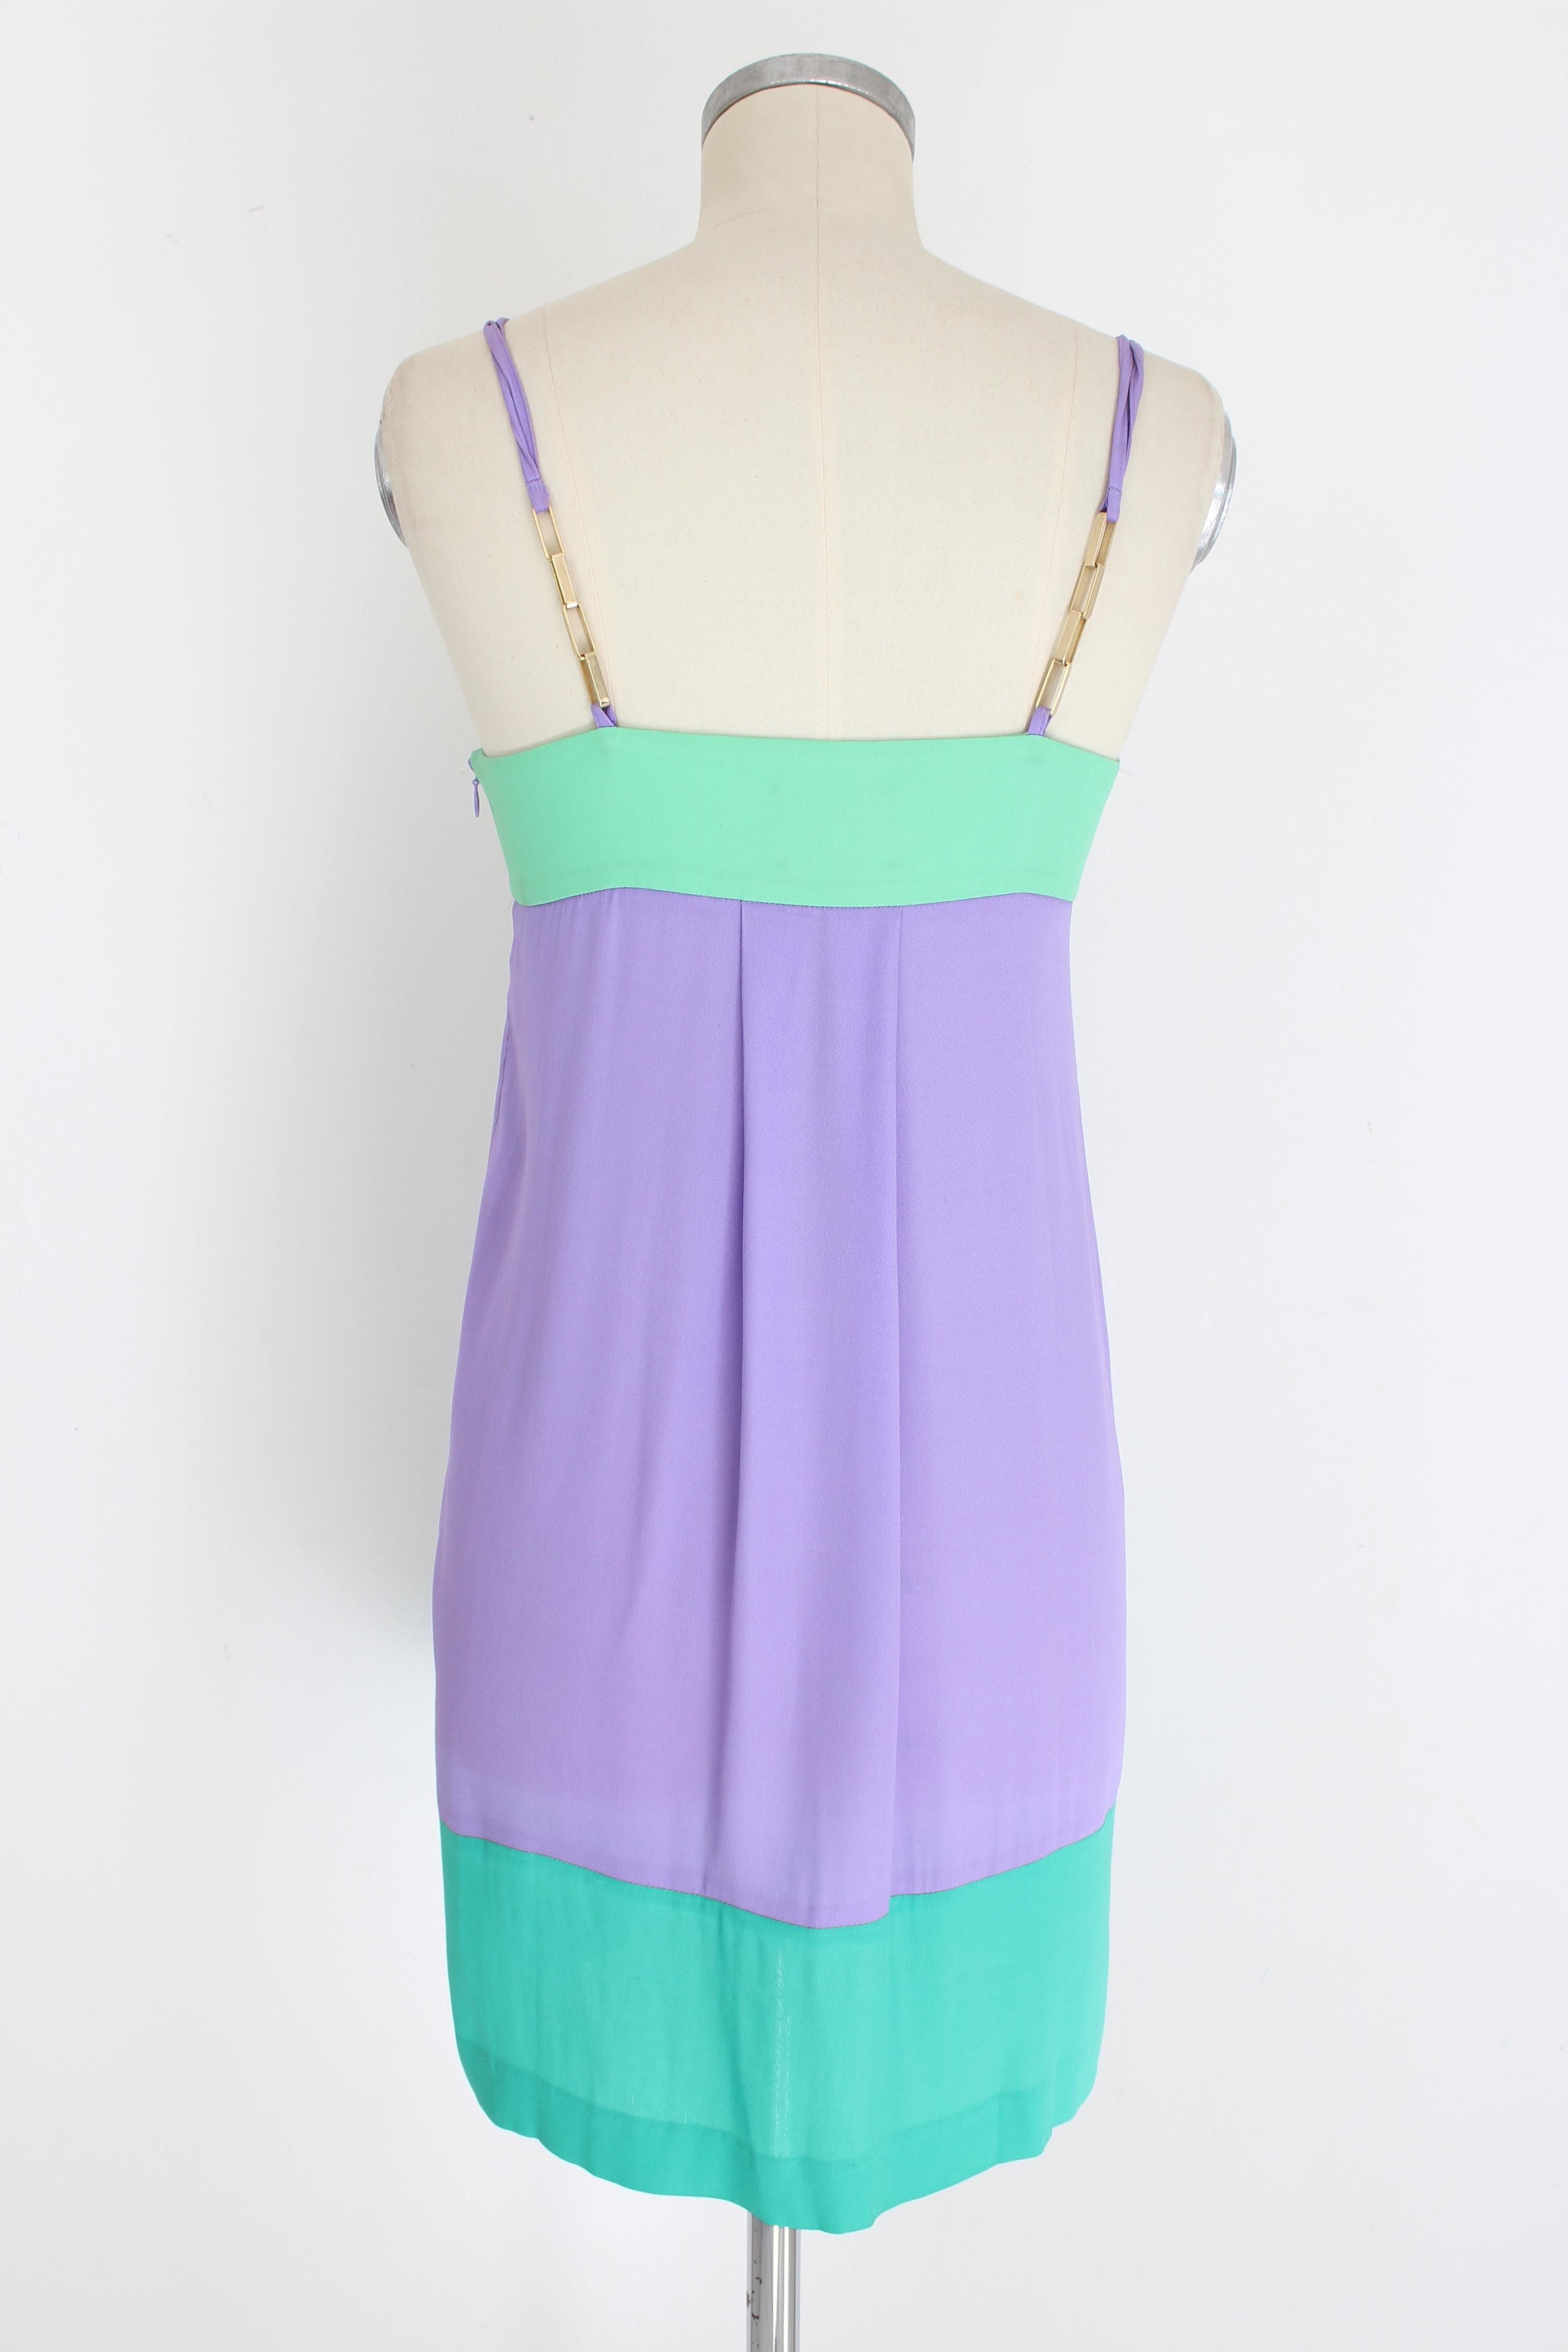 Roberto Cavalli Class 2000s women's dress. Elegant sheath dress, knee length. Green and purple color, the suspenders are in golden chain. Deep sweetheart neckline. 100% viscose fabric. Made in Italy.

Condition: Excellent

Item used few times, it